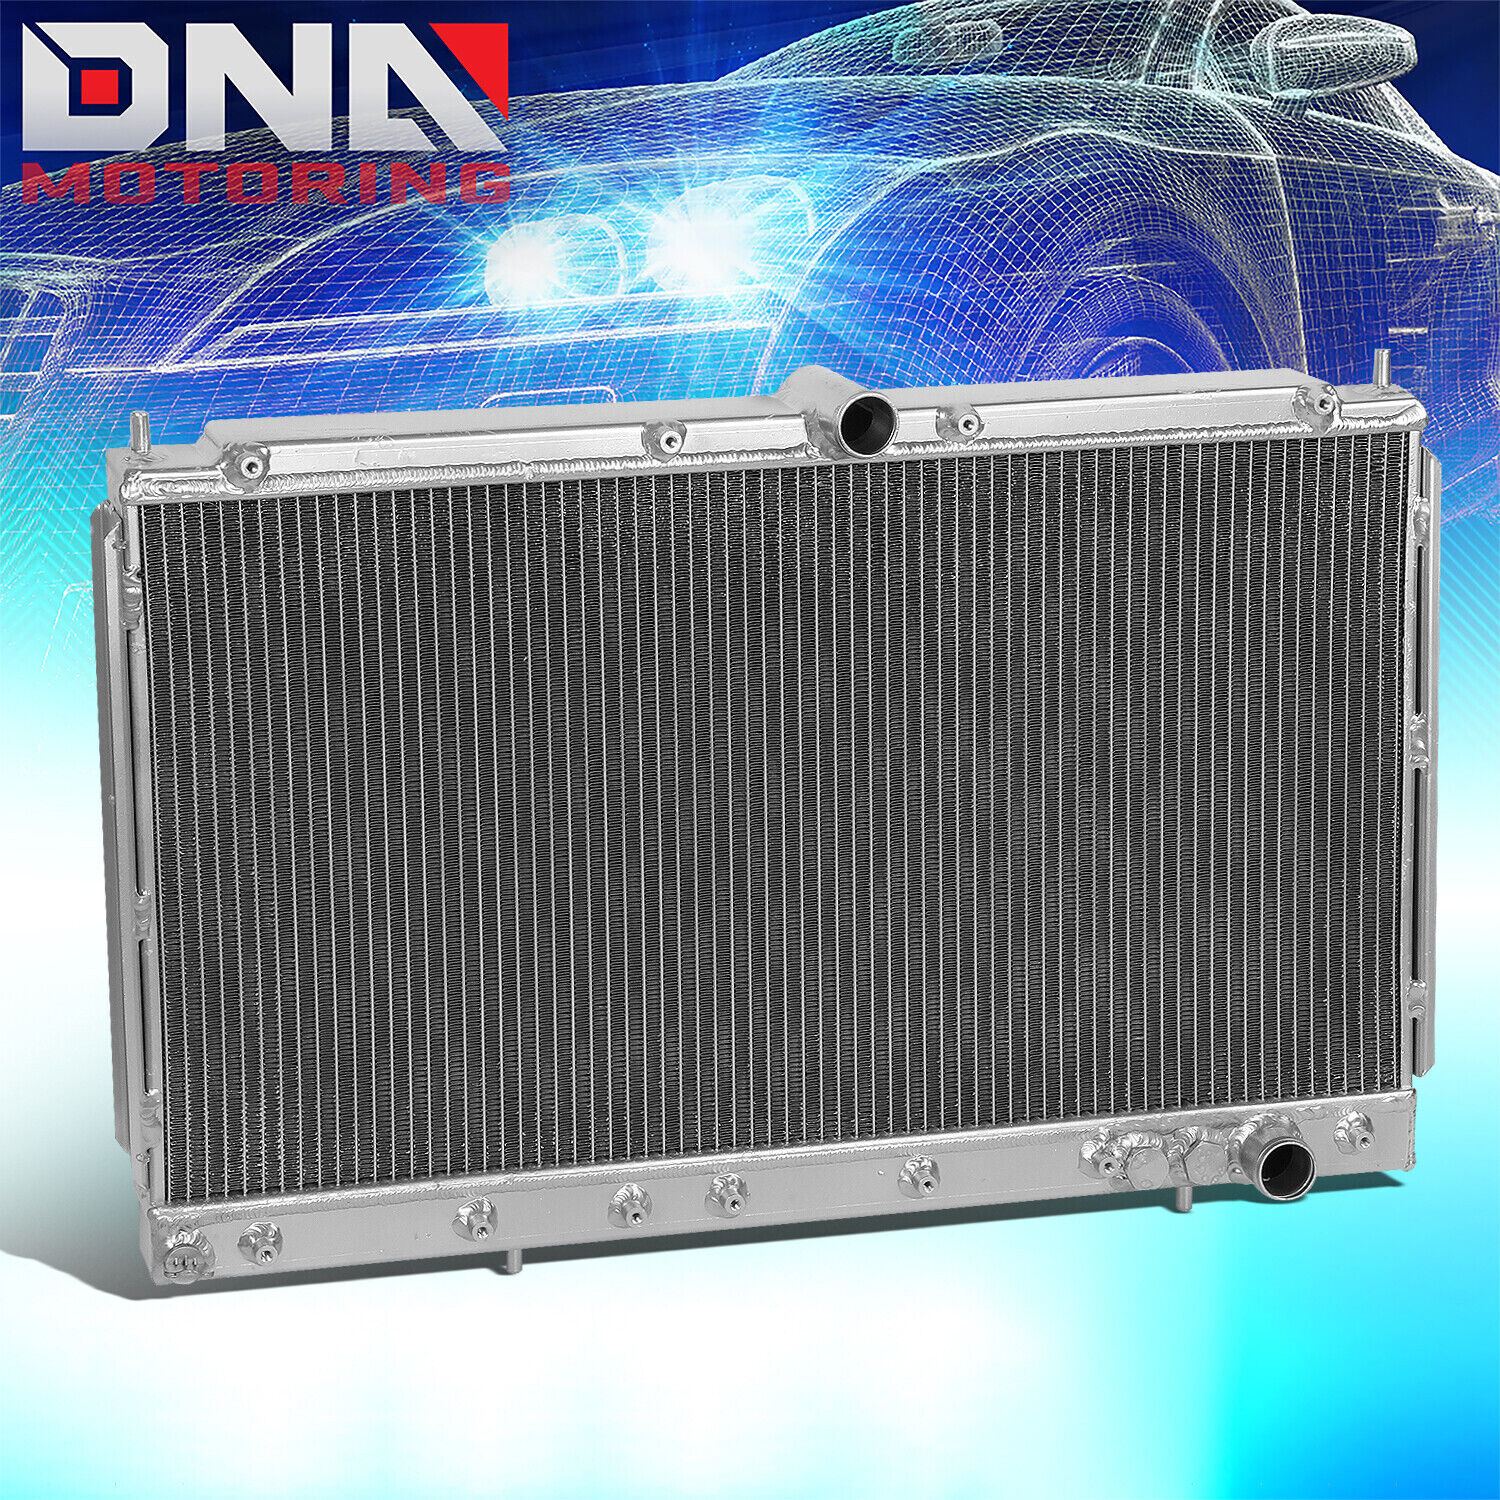 FOR 1991-1999 MIT 3000GT/STEALTH MT GTO VR4 2-ROW ALUMINUM RACING RADIATOR+CAP